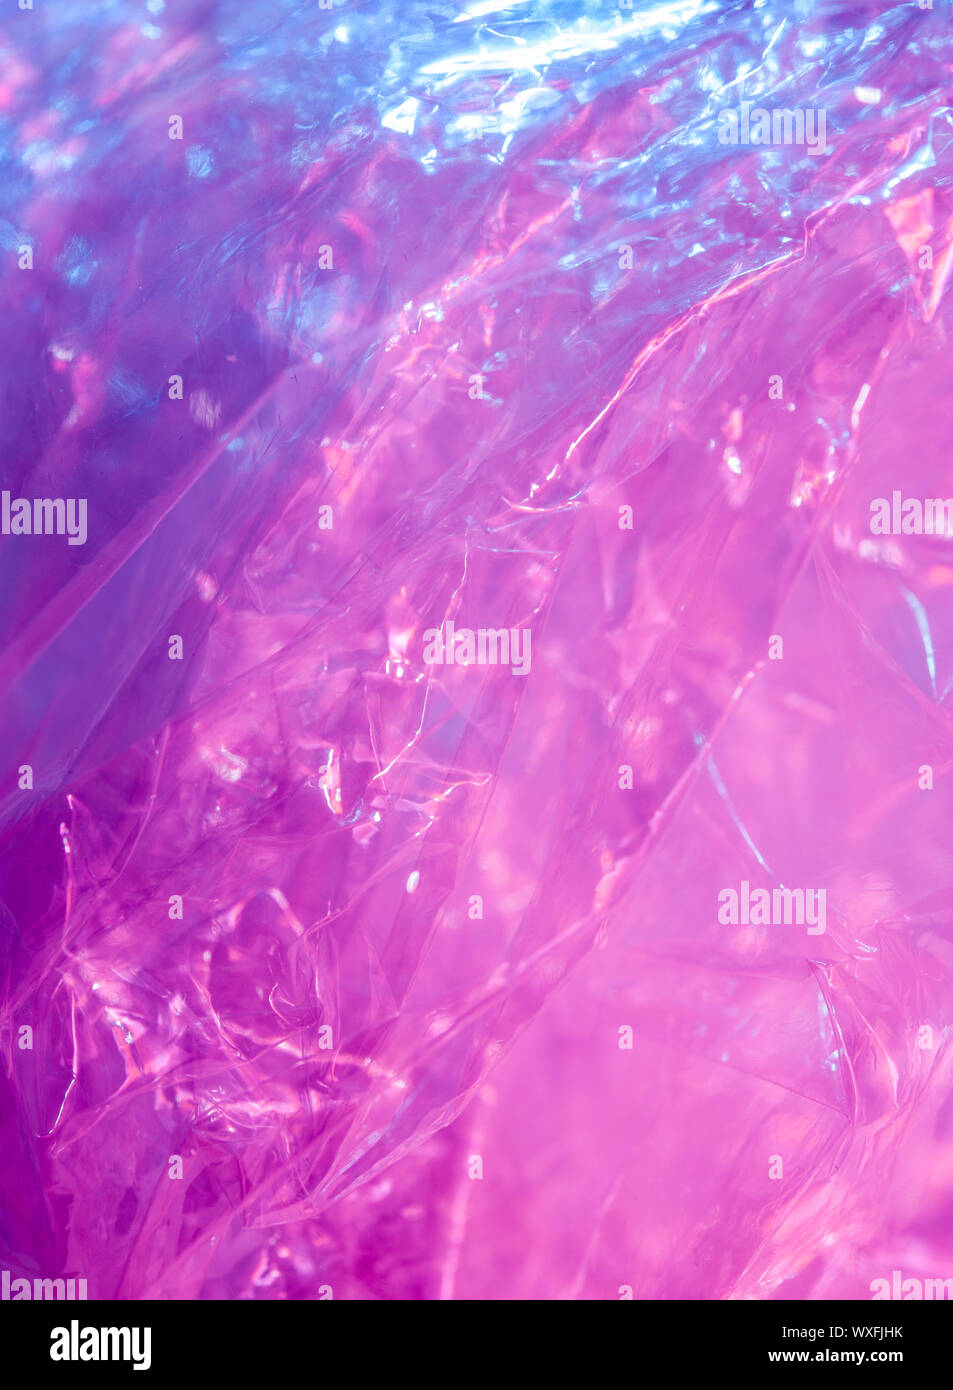 Holographic Background In The Style Of The 80 90s Real Texture Of Cellophane Film In Bright Acid Colors Stock Photo Alamy